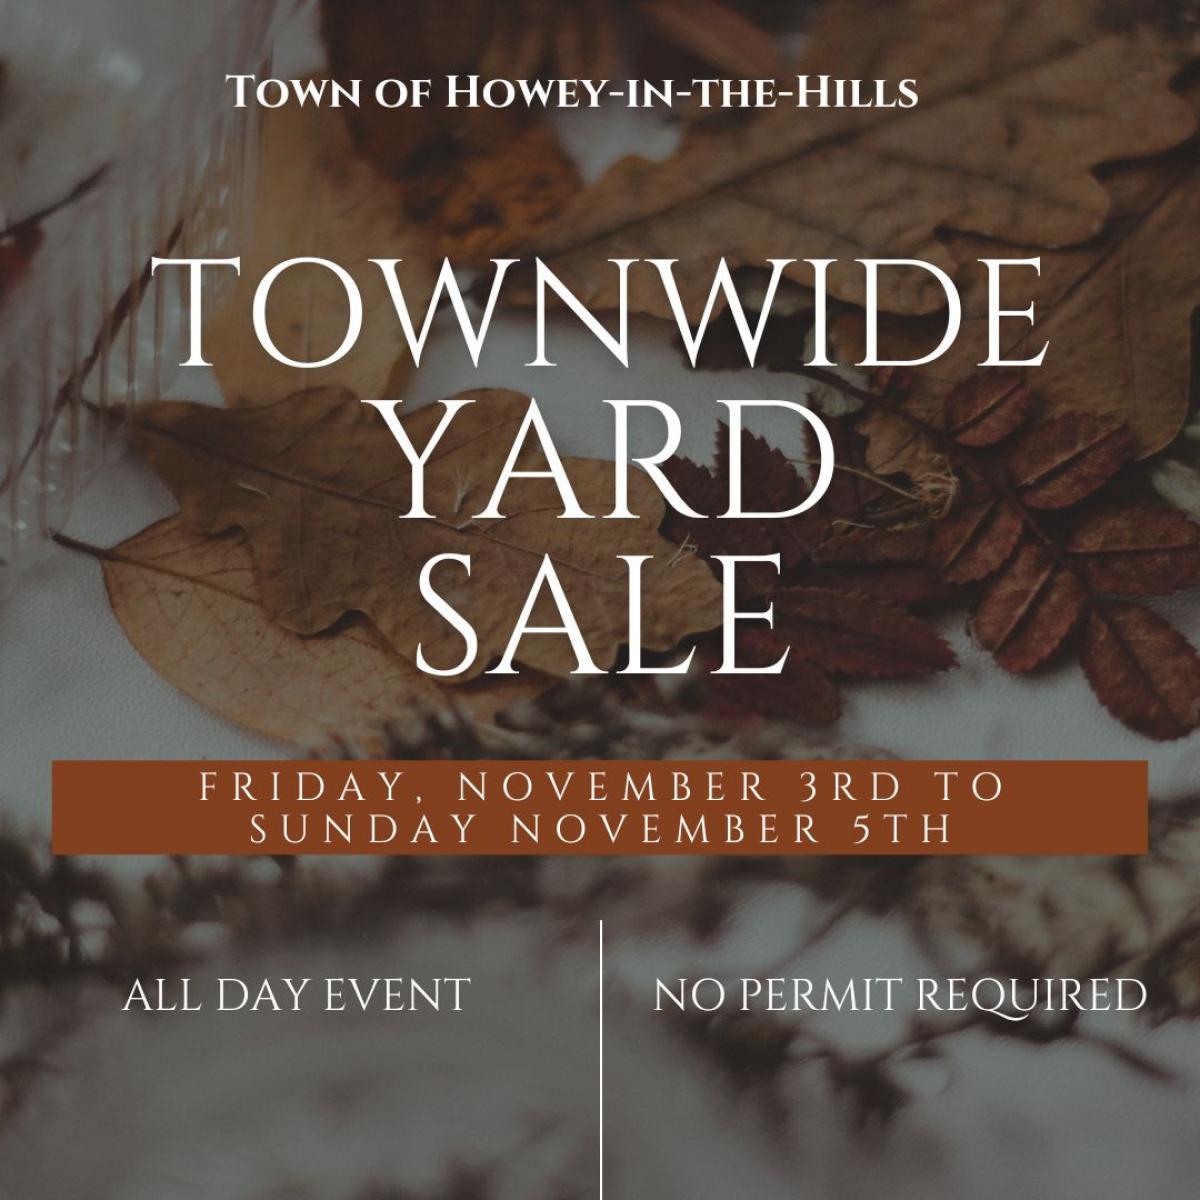 Fall Town wide yard sale notice